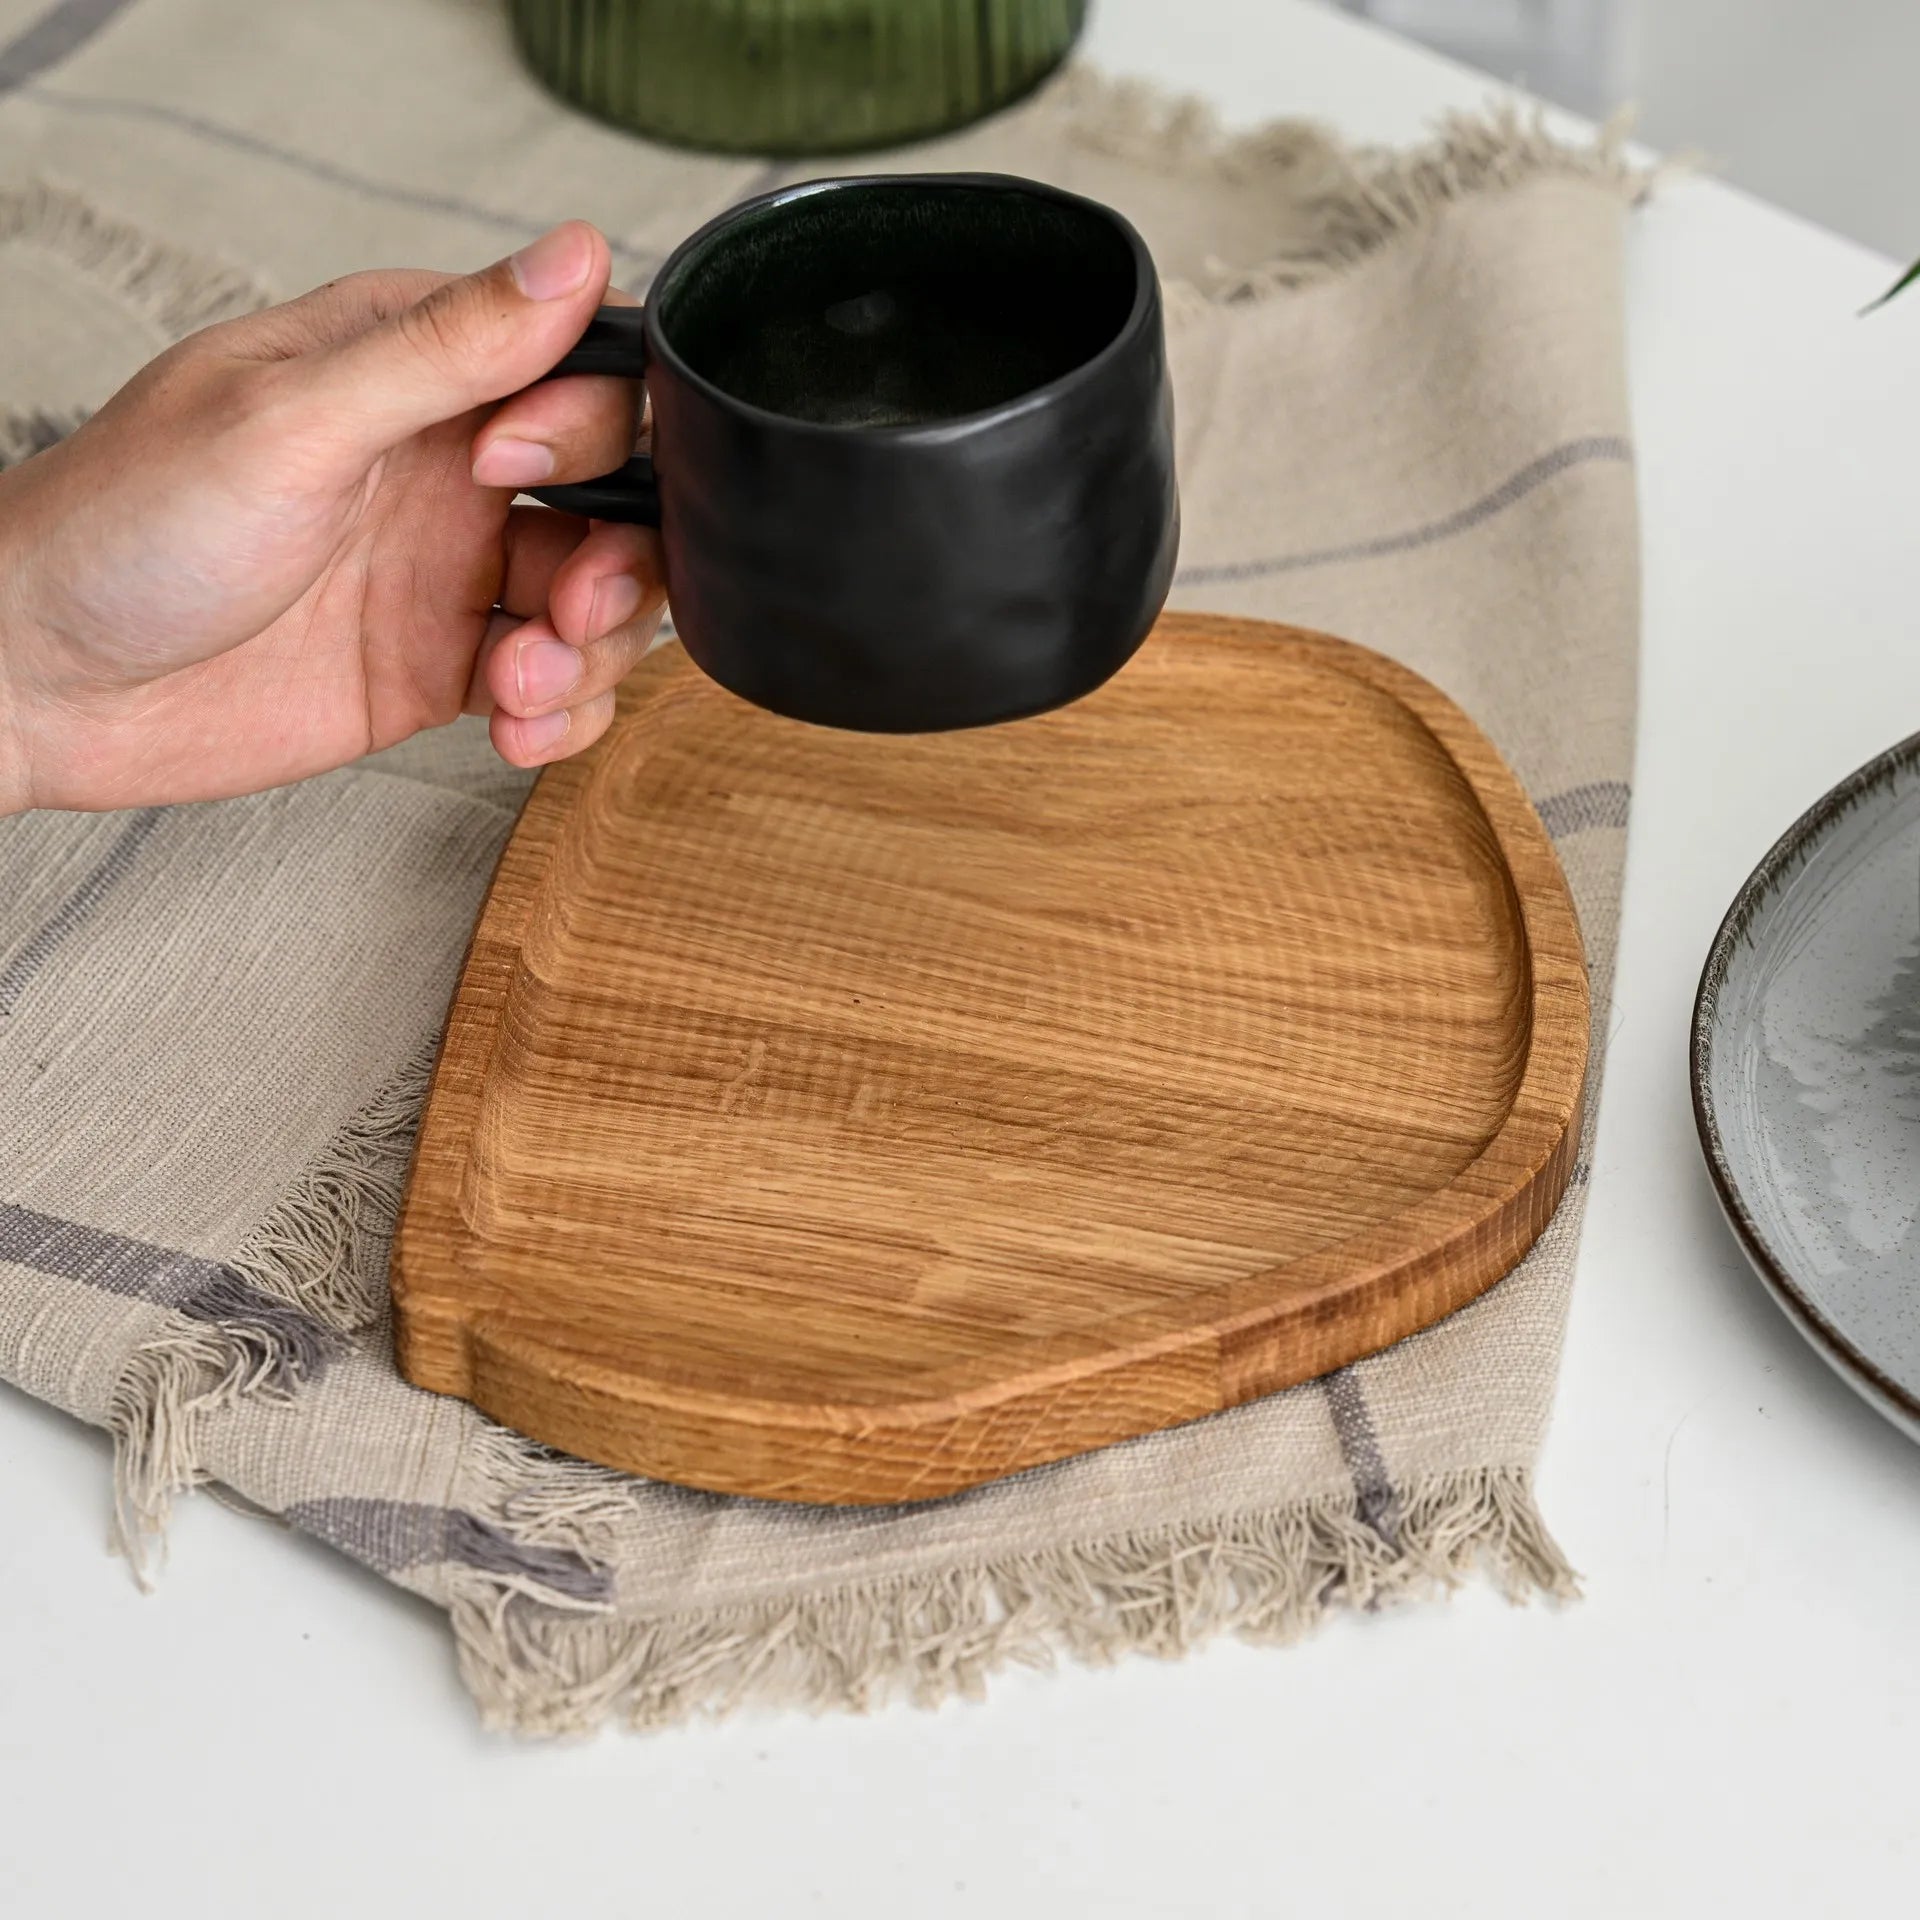 Rustic cafe decorative tray for coffee and tea service